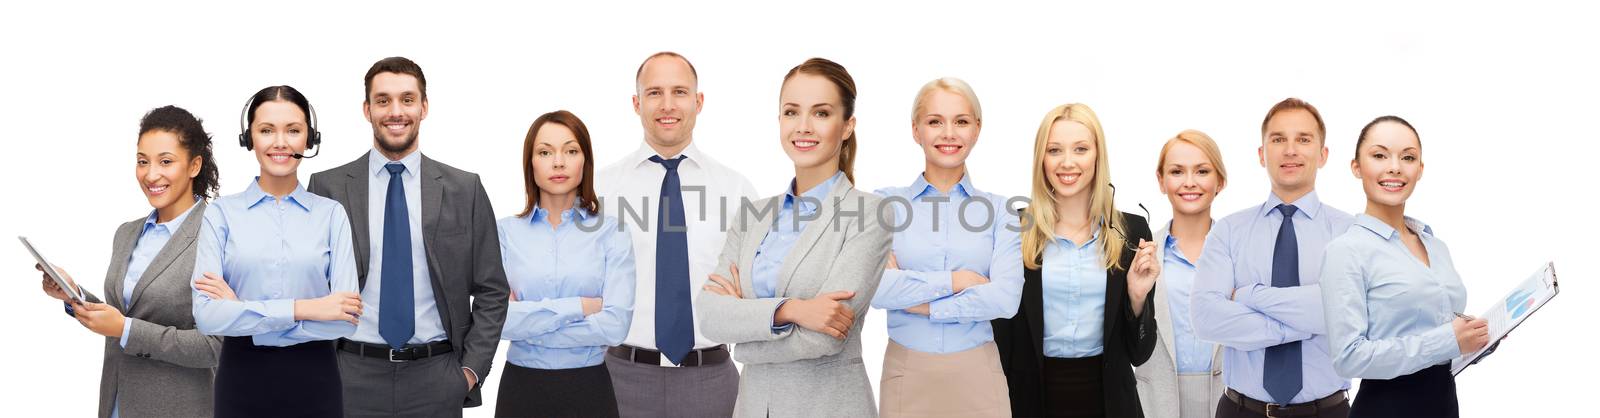 group of happy businesspeople by dolgachov